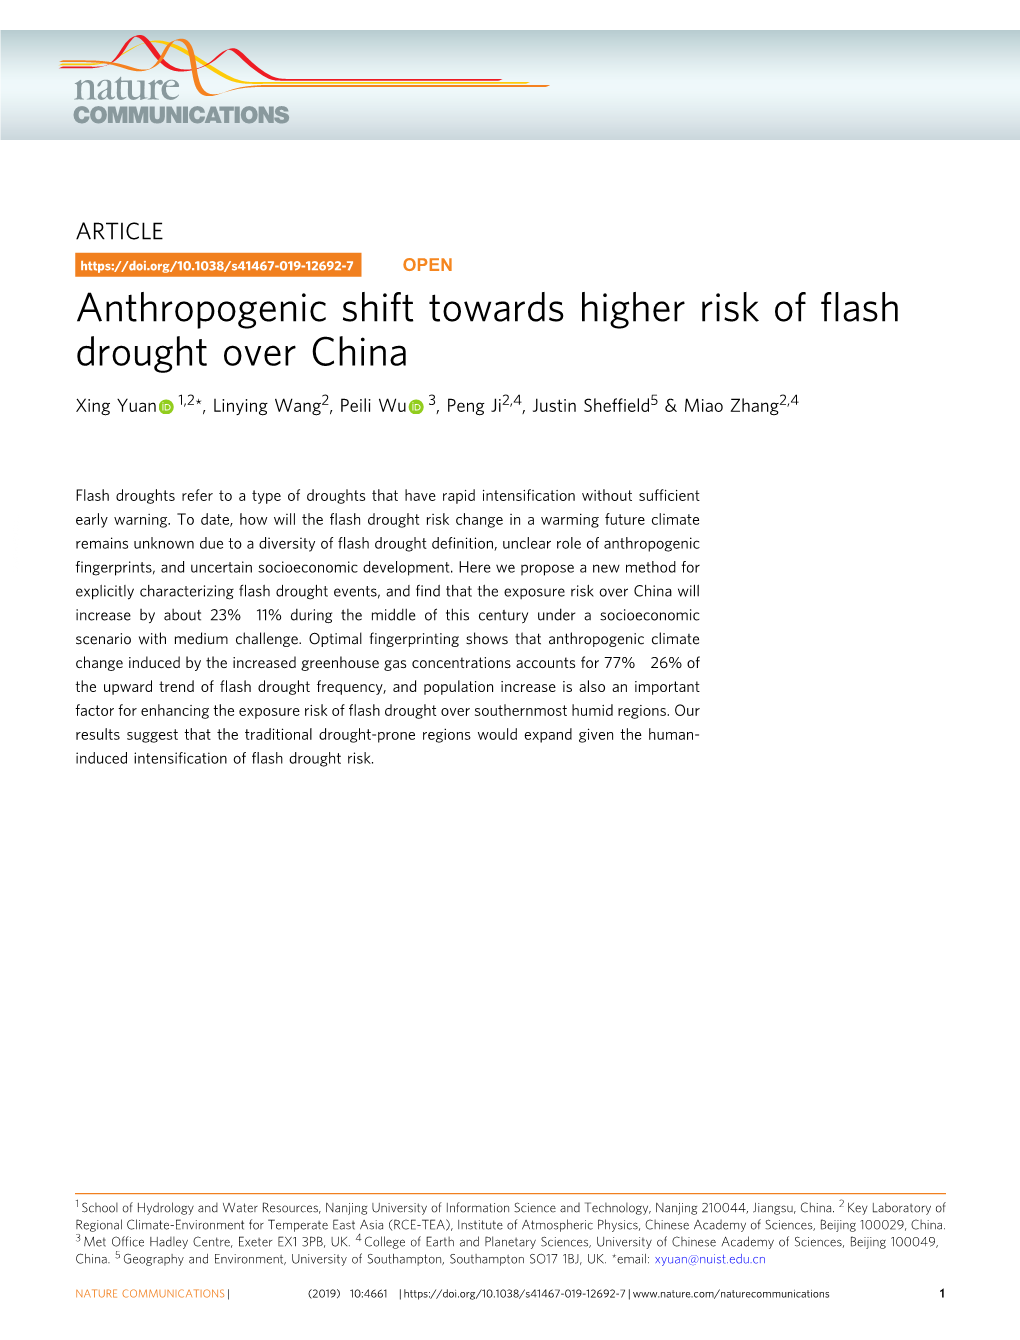 Anthropogenic Shift Towards Higher Risk of Flash Drought Over China